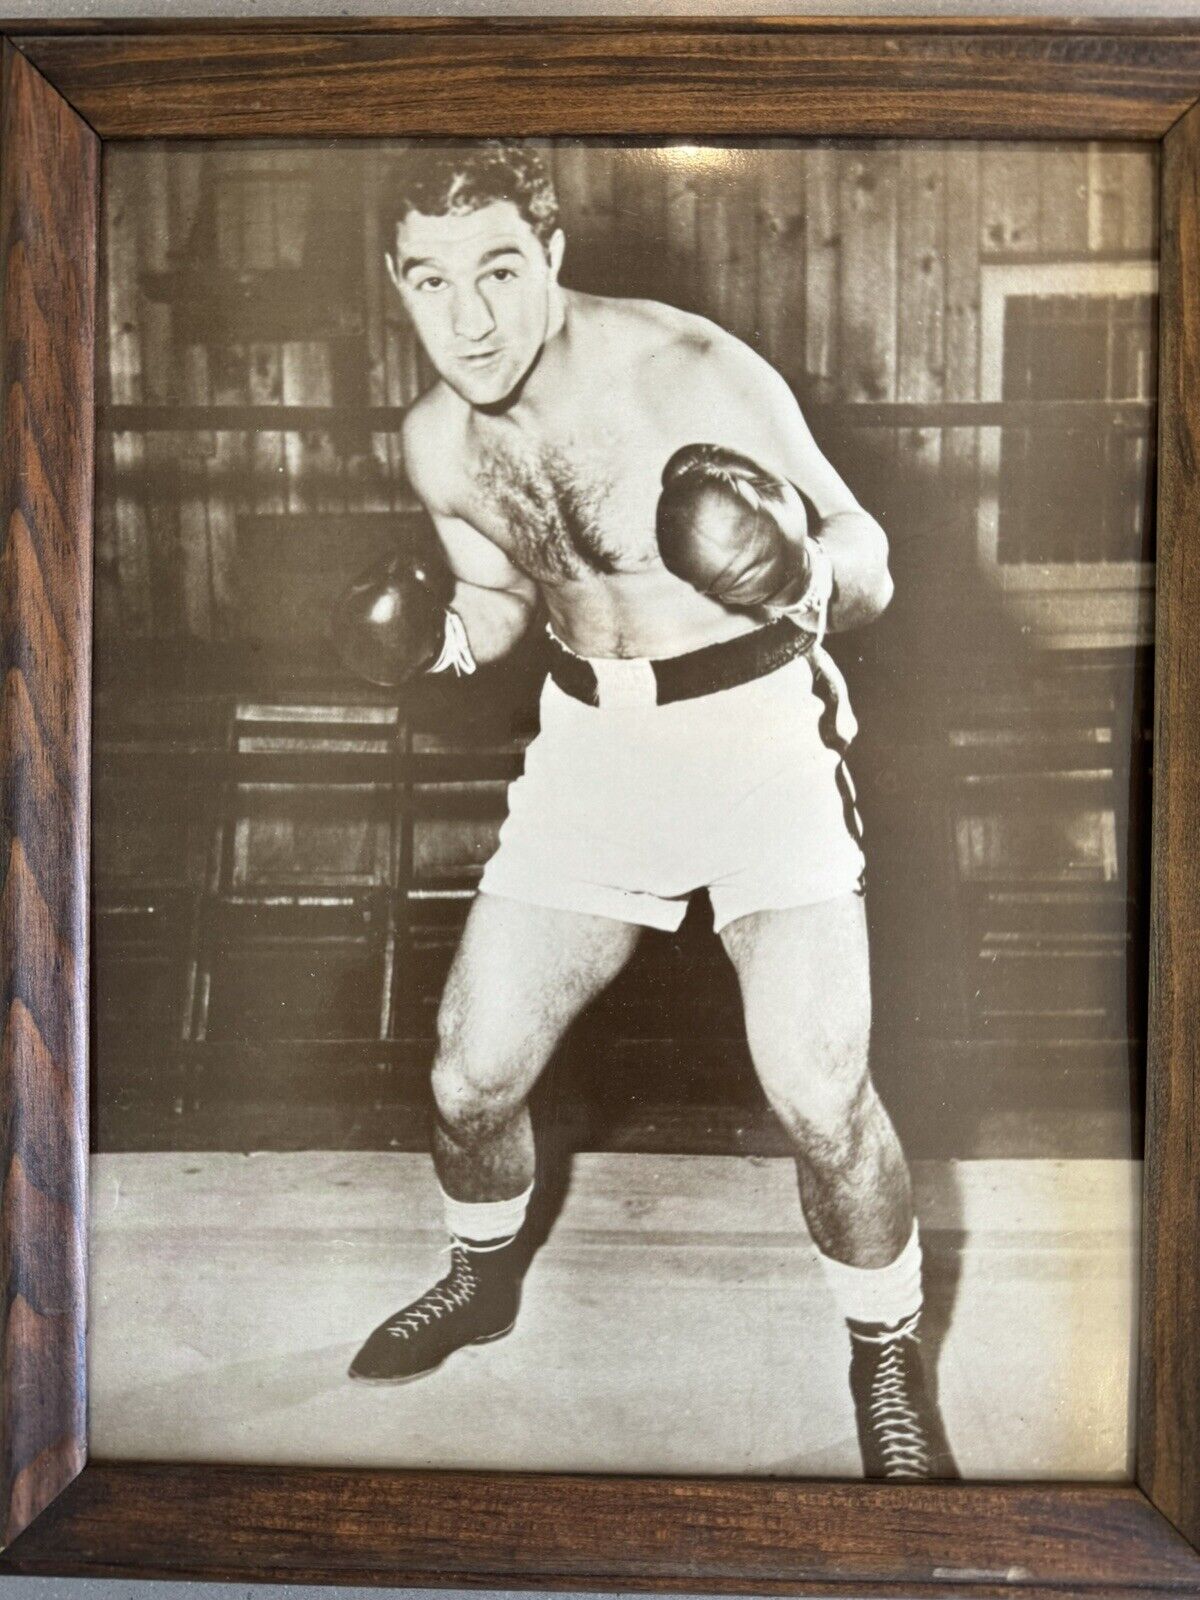 Rocky Marciano “In The Gym”